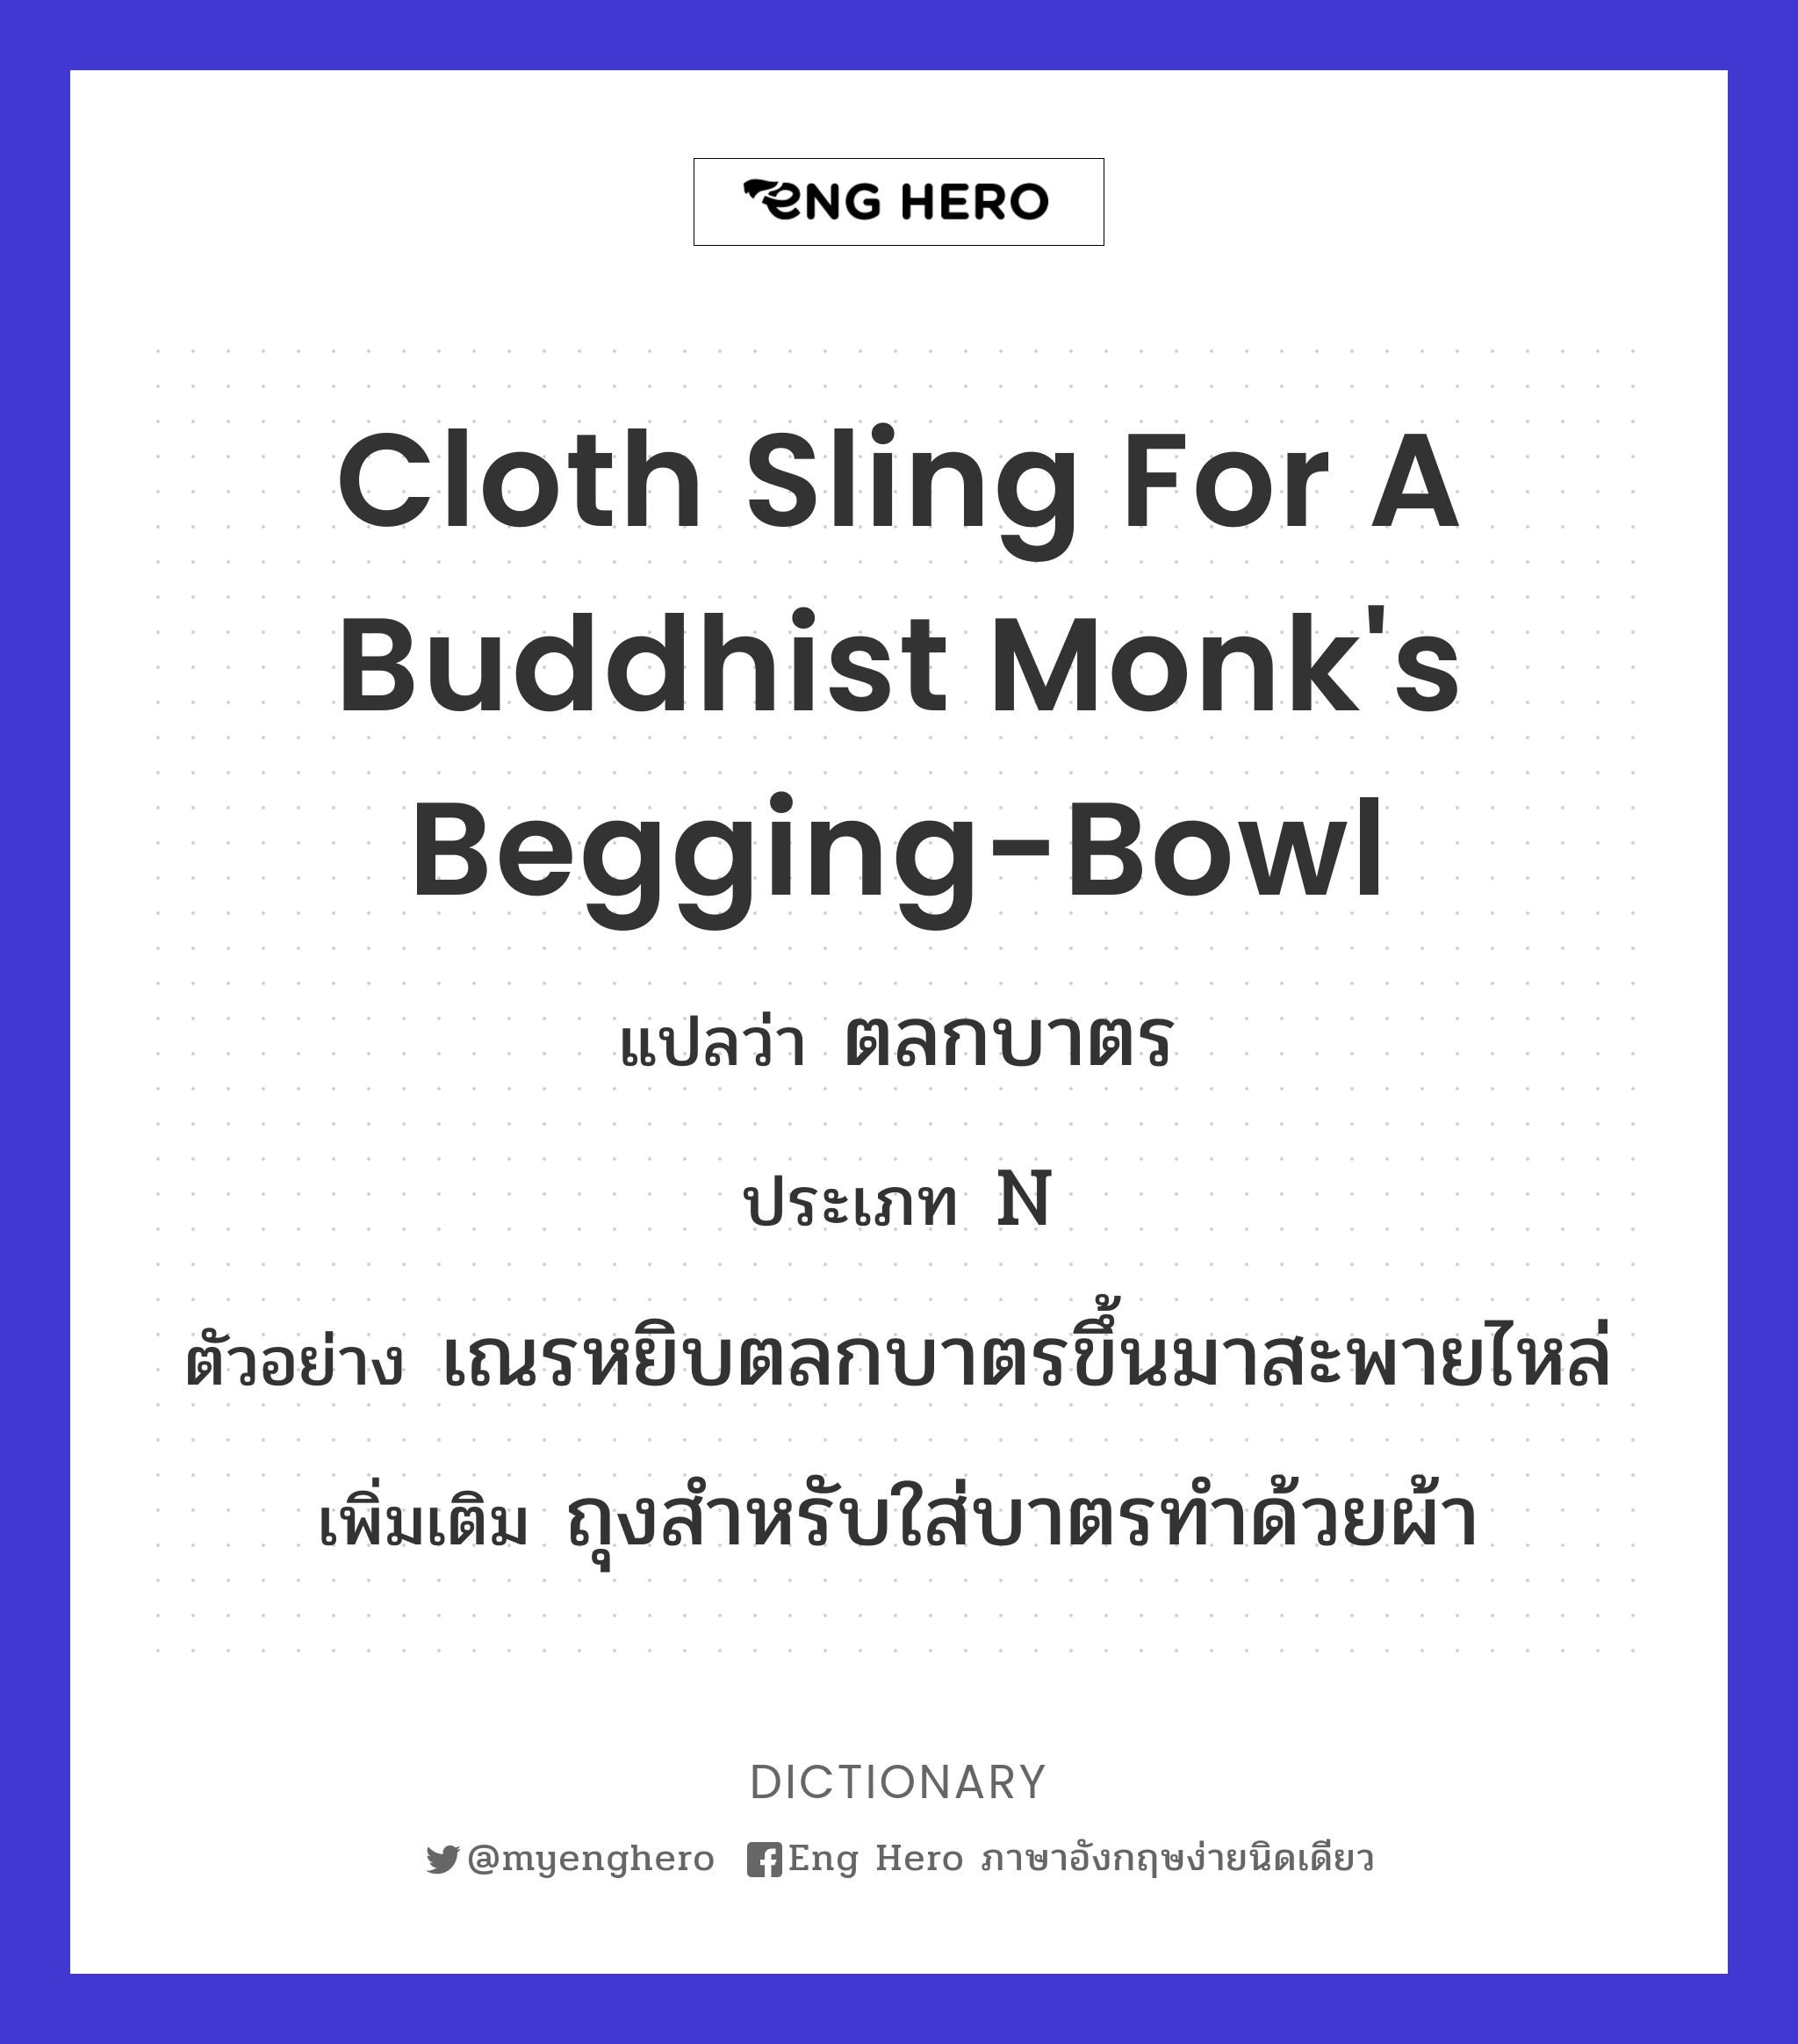 cloth sling for a Buddhist monk's begging-bowl